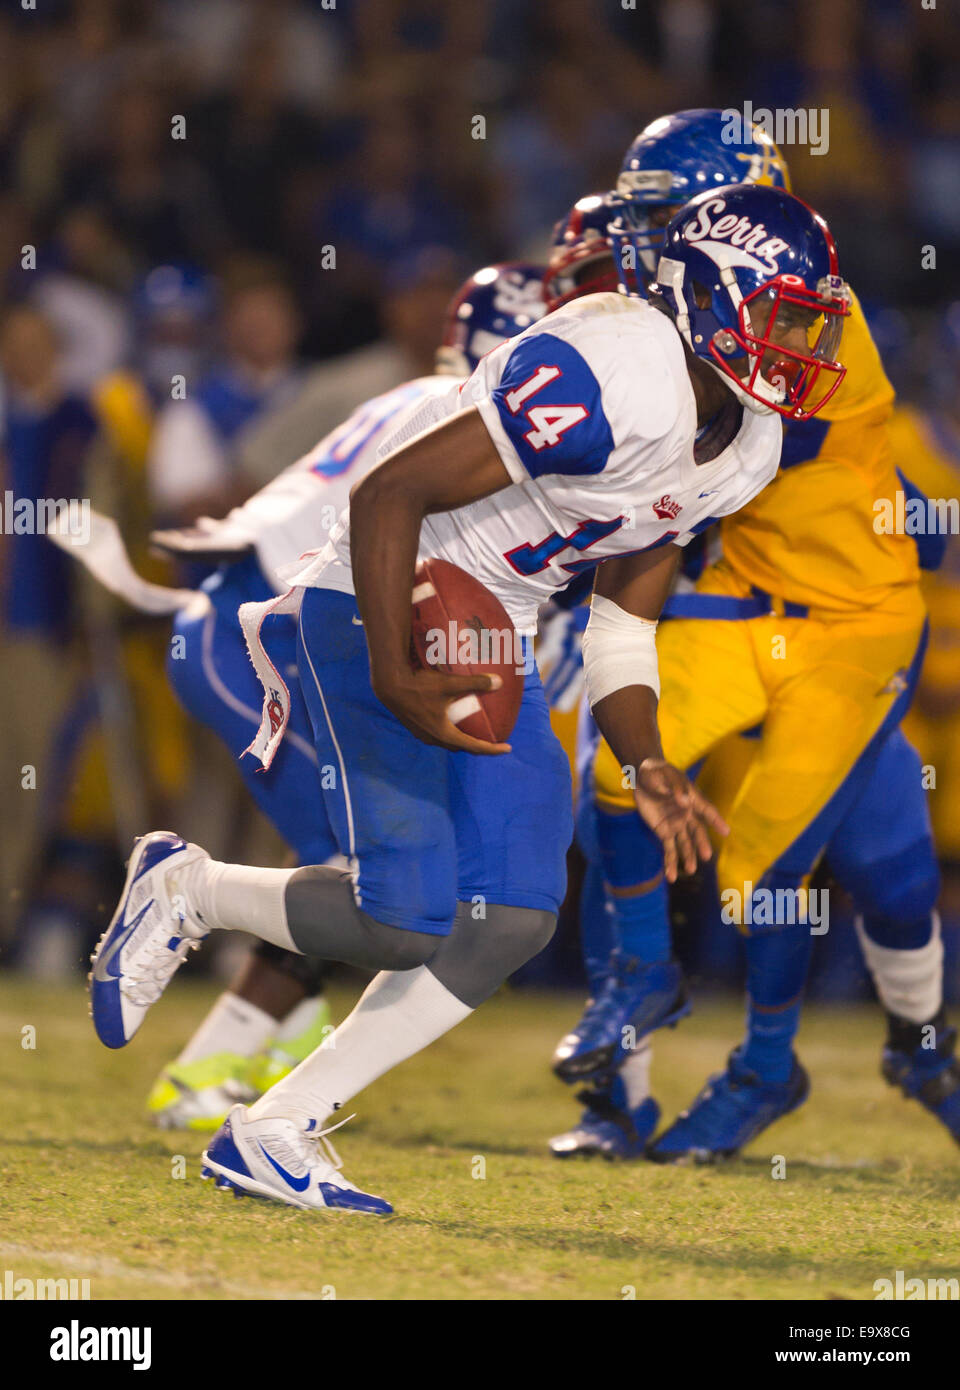 October 4, 2014, La Puente, CA.Gardena Serra cavaliers quarterback (14) Khalil Tate in action during the Bishop Amat upset of the Cavaliers at Bishop Amat high school on October 3, 2014. The Cavaliers who are usually a nationally ranked high school football team, were upset by Bishop Amat 14 - 7. (Mandatory Credit: Ed Ruvalcaba/MarinMedia.org) (Complete photographer, and company credit required) Stock Photo